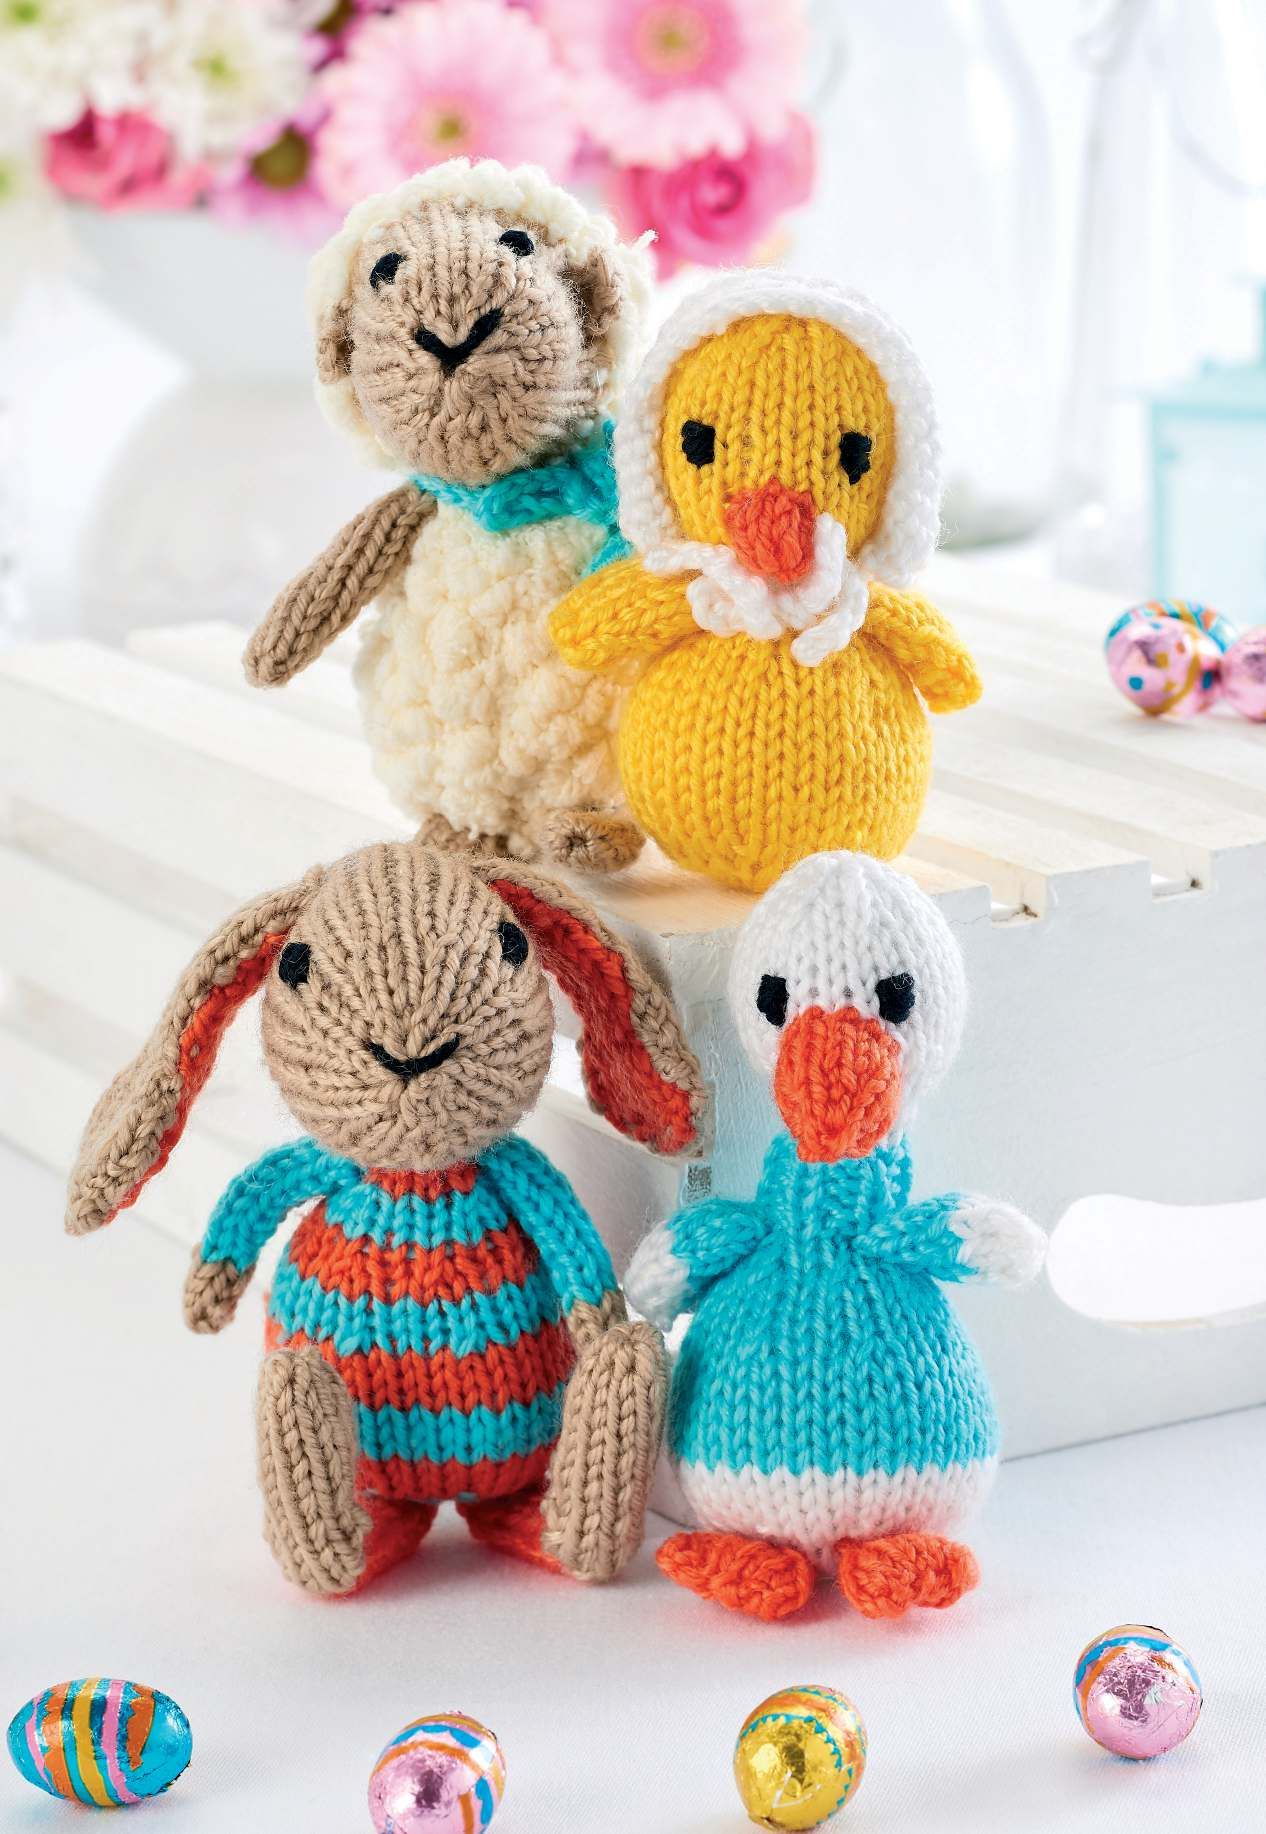 Quick Knit Easter Toys Knitting Patterns Let's Knit